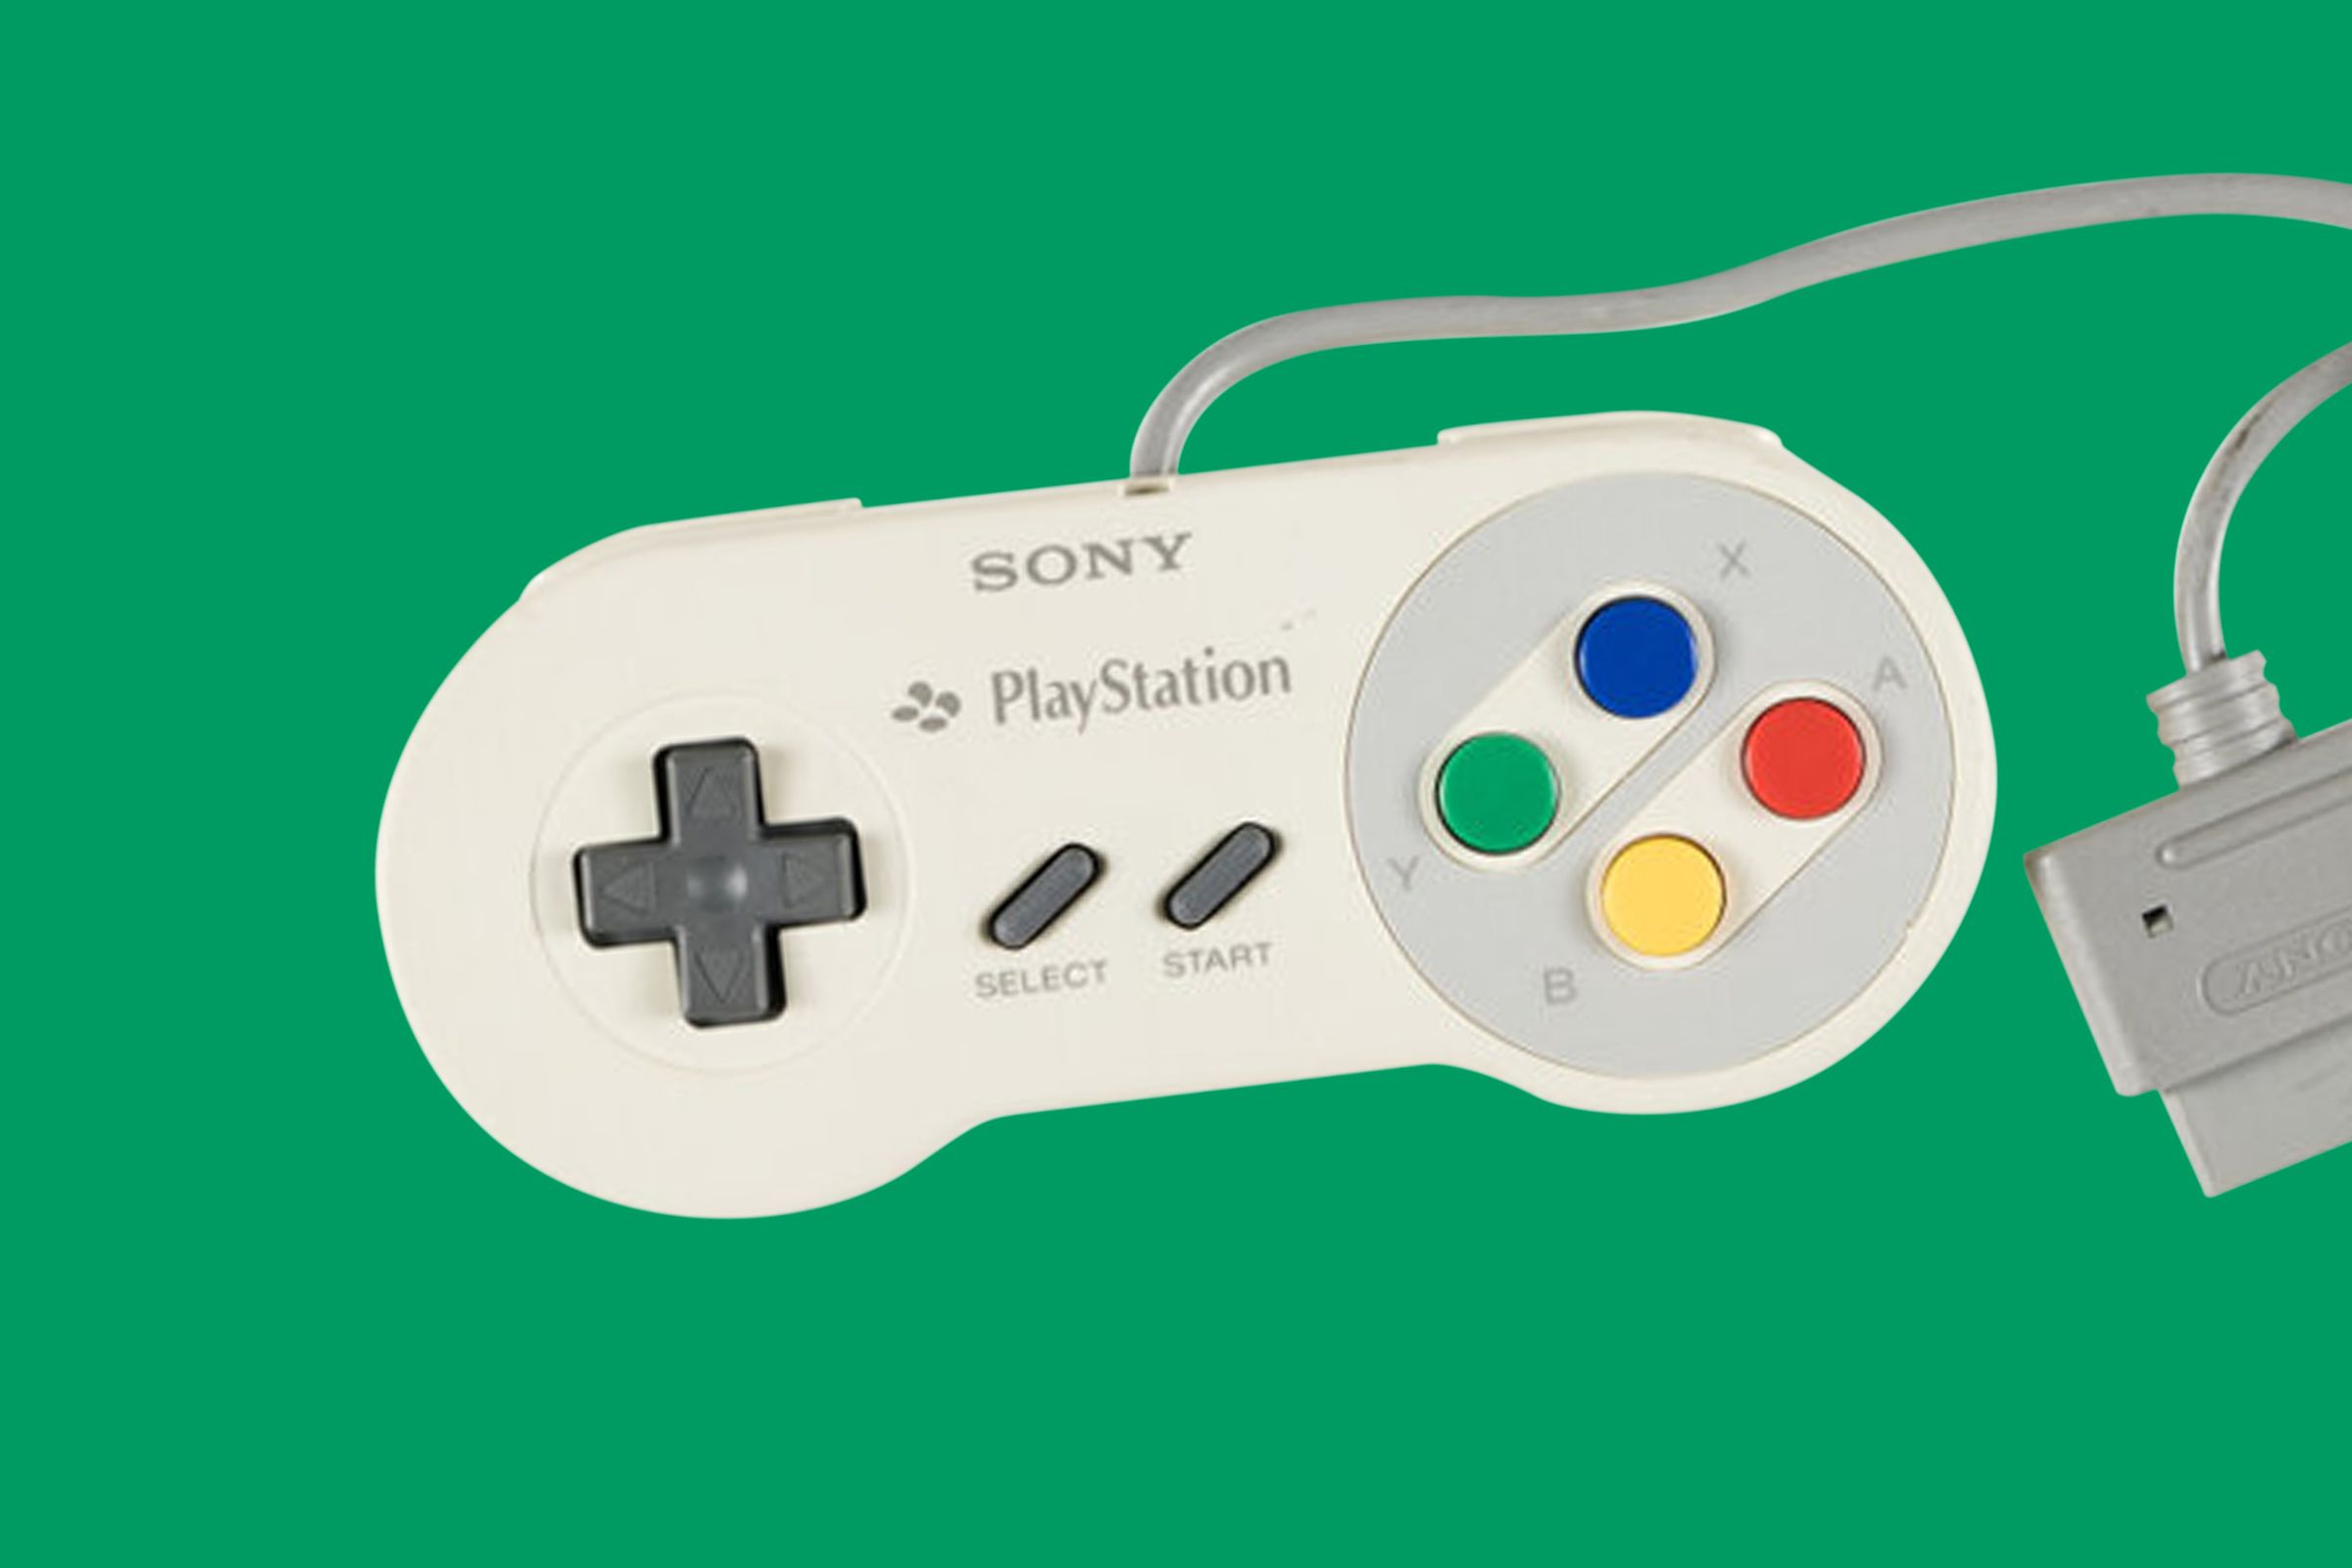 An image of a rare Nintendo Playstation controller on a green background.